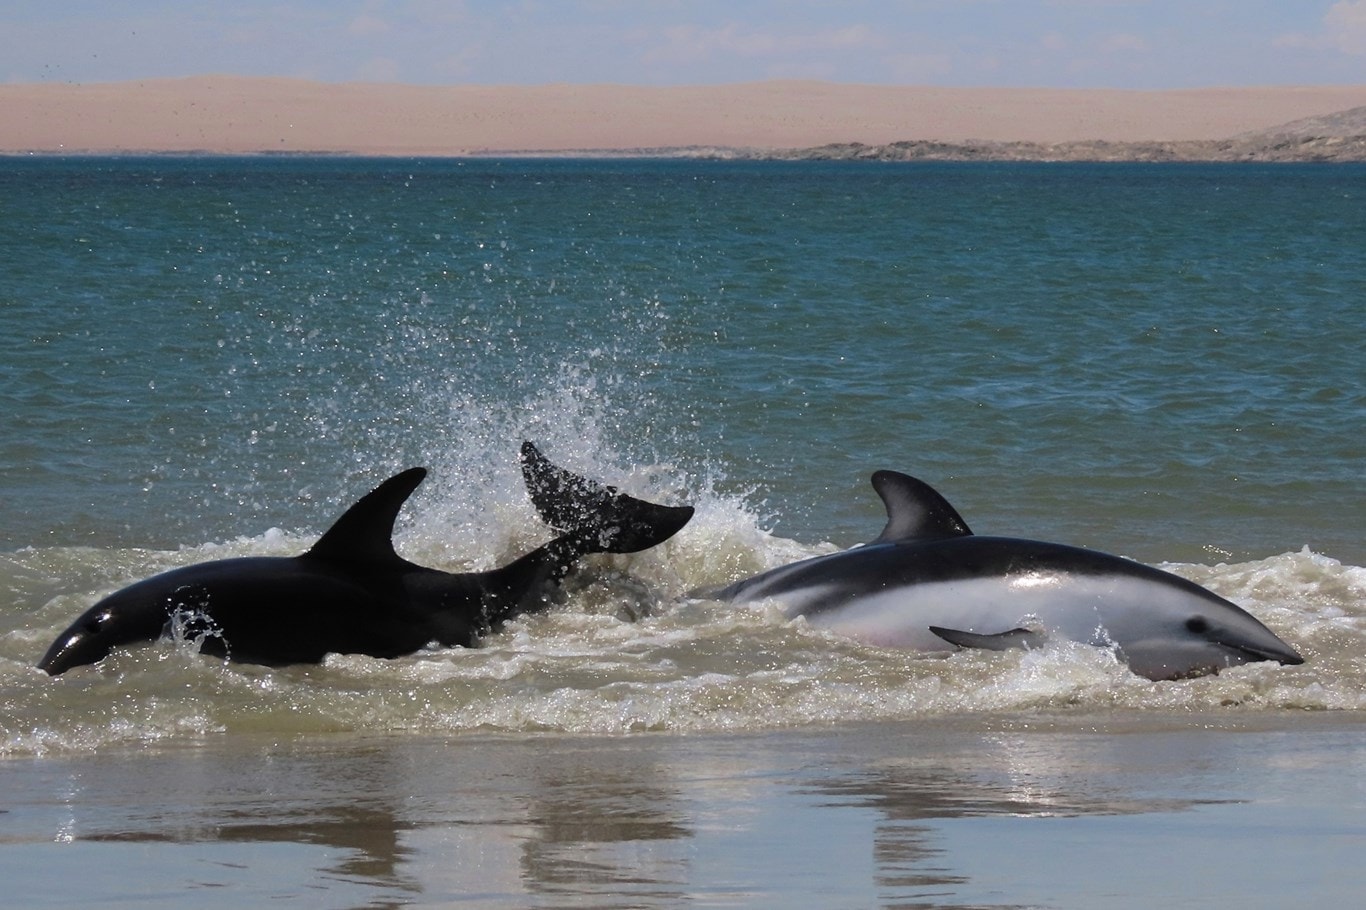 Stranded-Dusky-Dolphins-shortly-before-rescue-at-Shearwater-Bay©J-Kemper-RESIZED